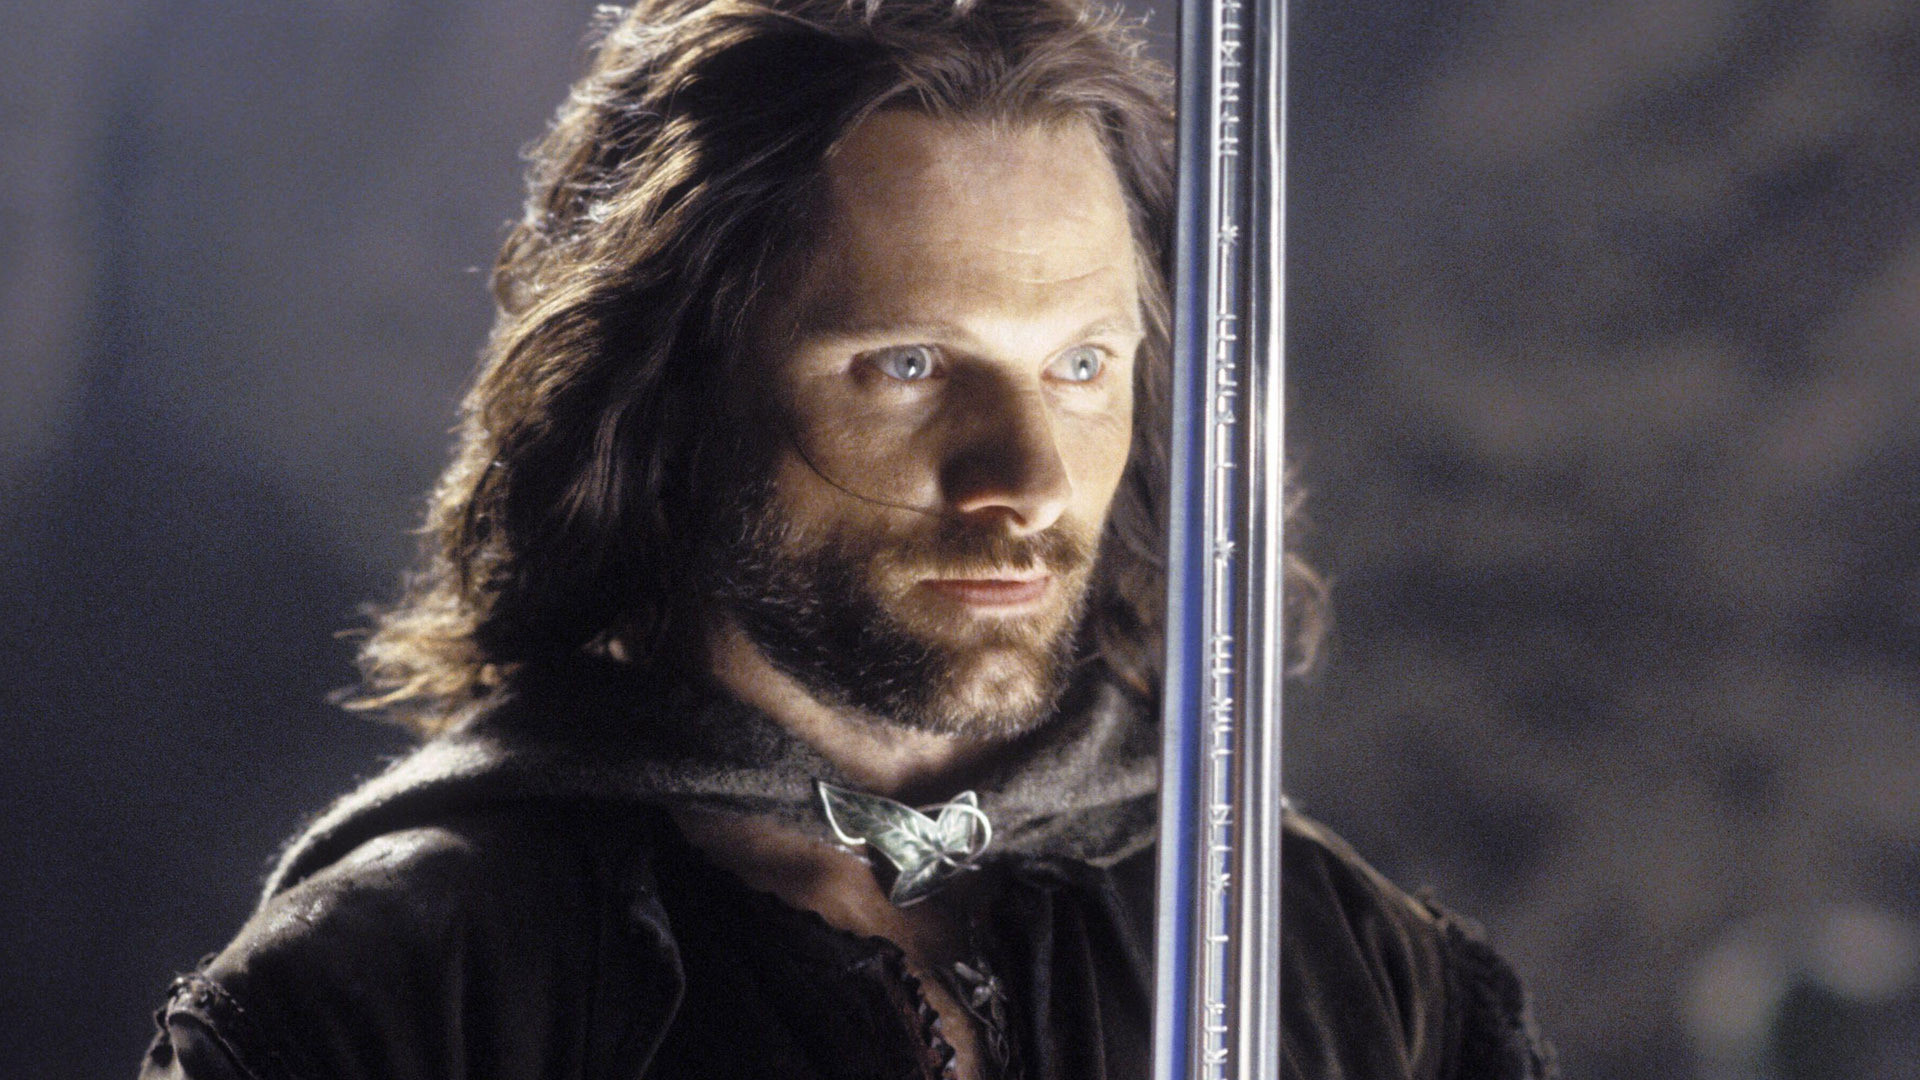 The Return of the King: The heir of Isildur, An ancient King of Arnor and Gondor. 1920x1080 Full HD Wallpaper.